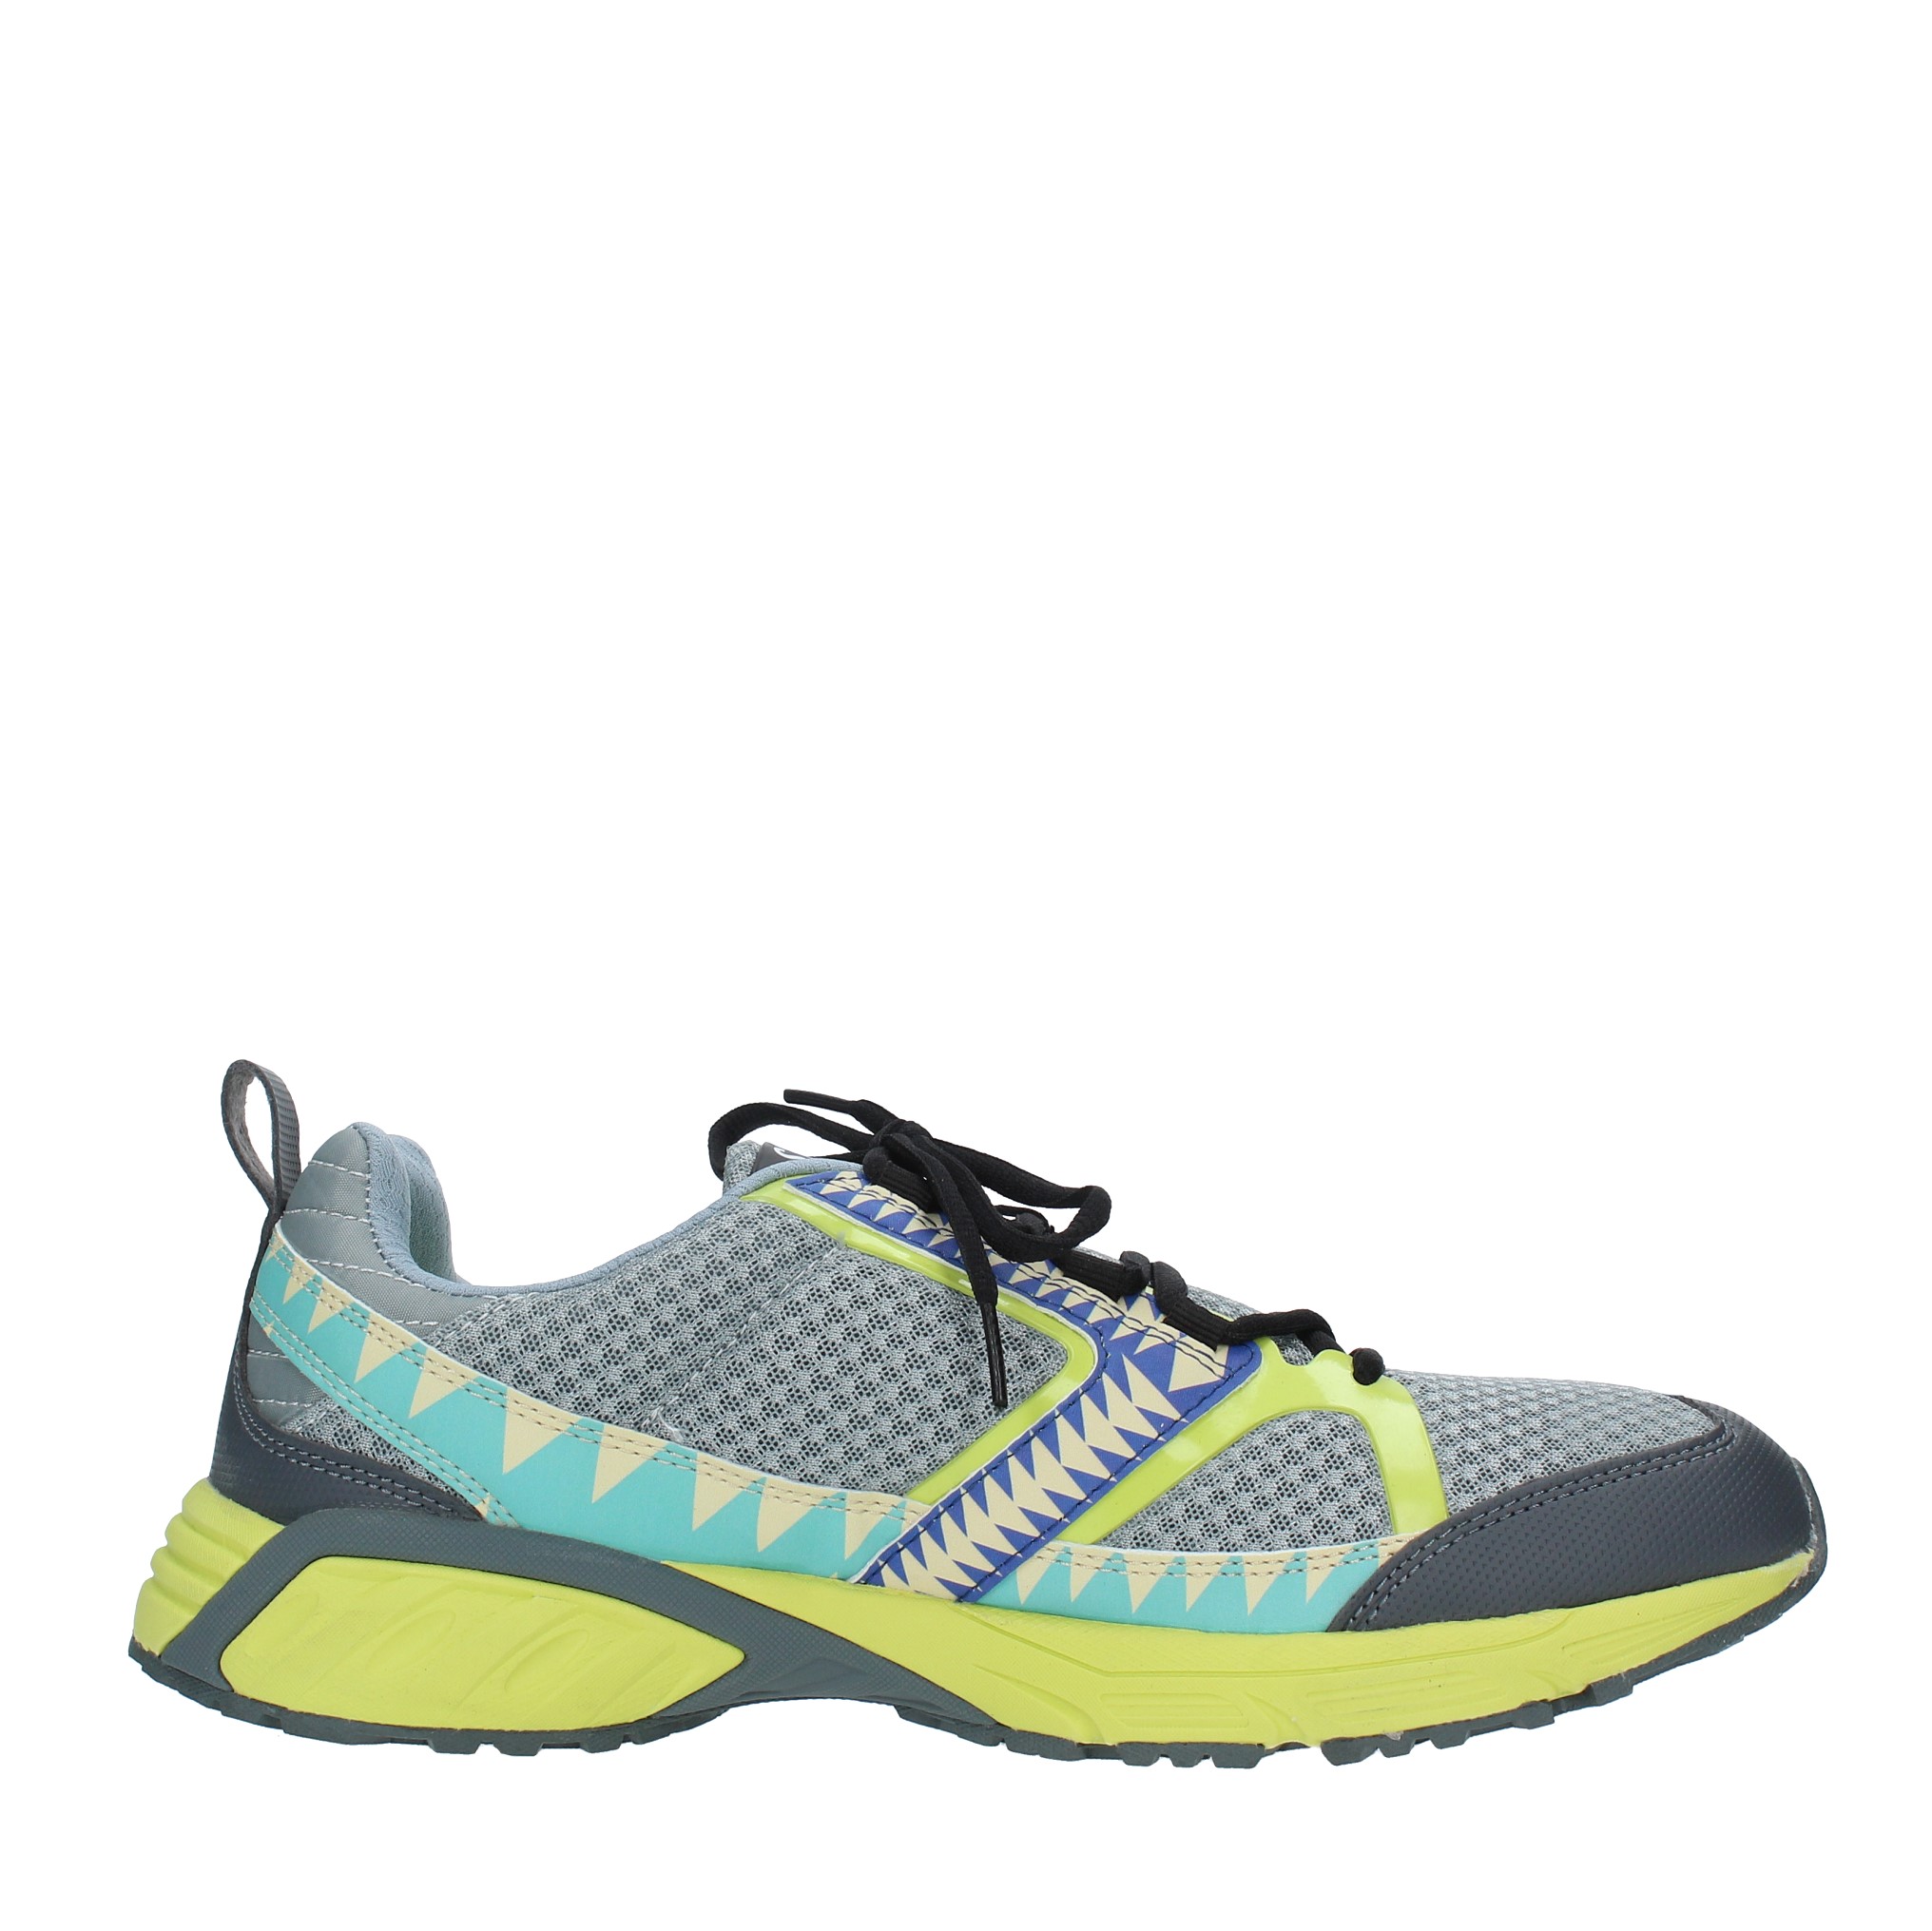 Trainers Multicolour - STRD BY VOLTA FOOTWEAR - Ginevra calzature